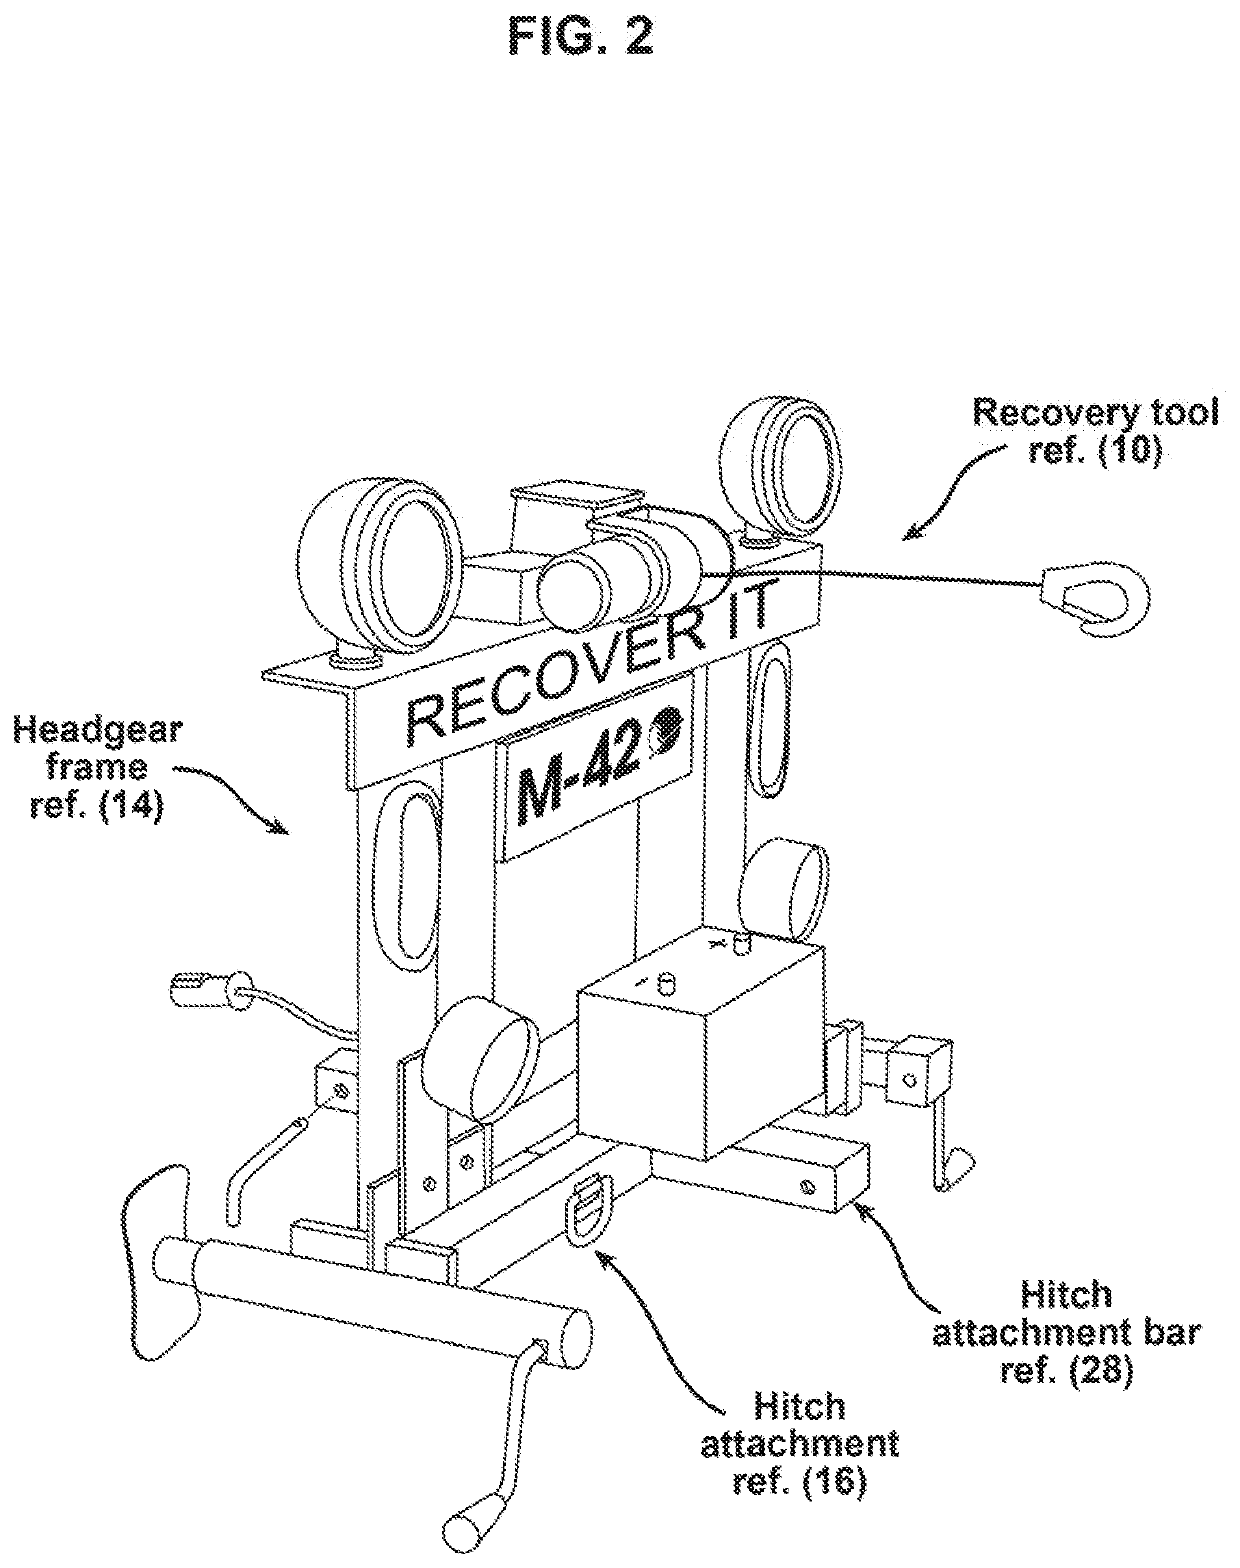 Recovery tool to use with a vehicle